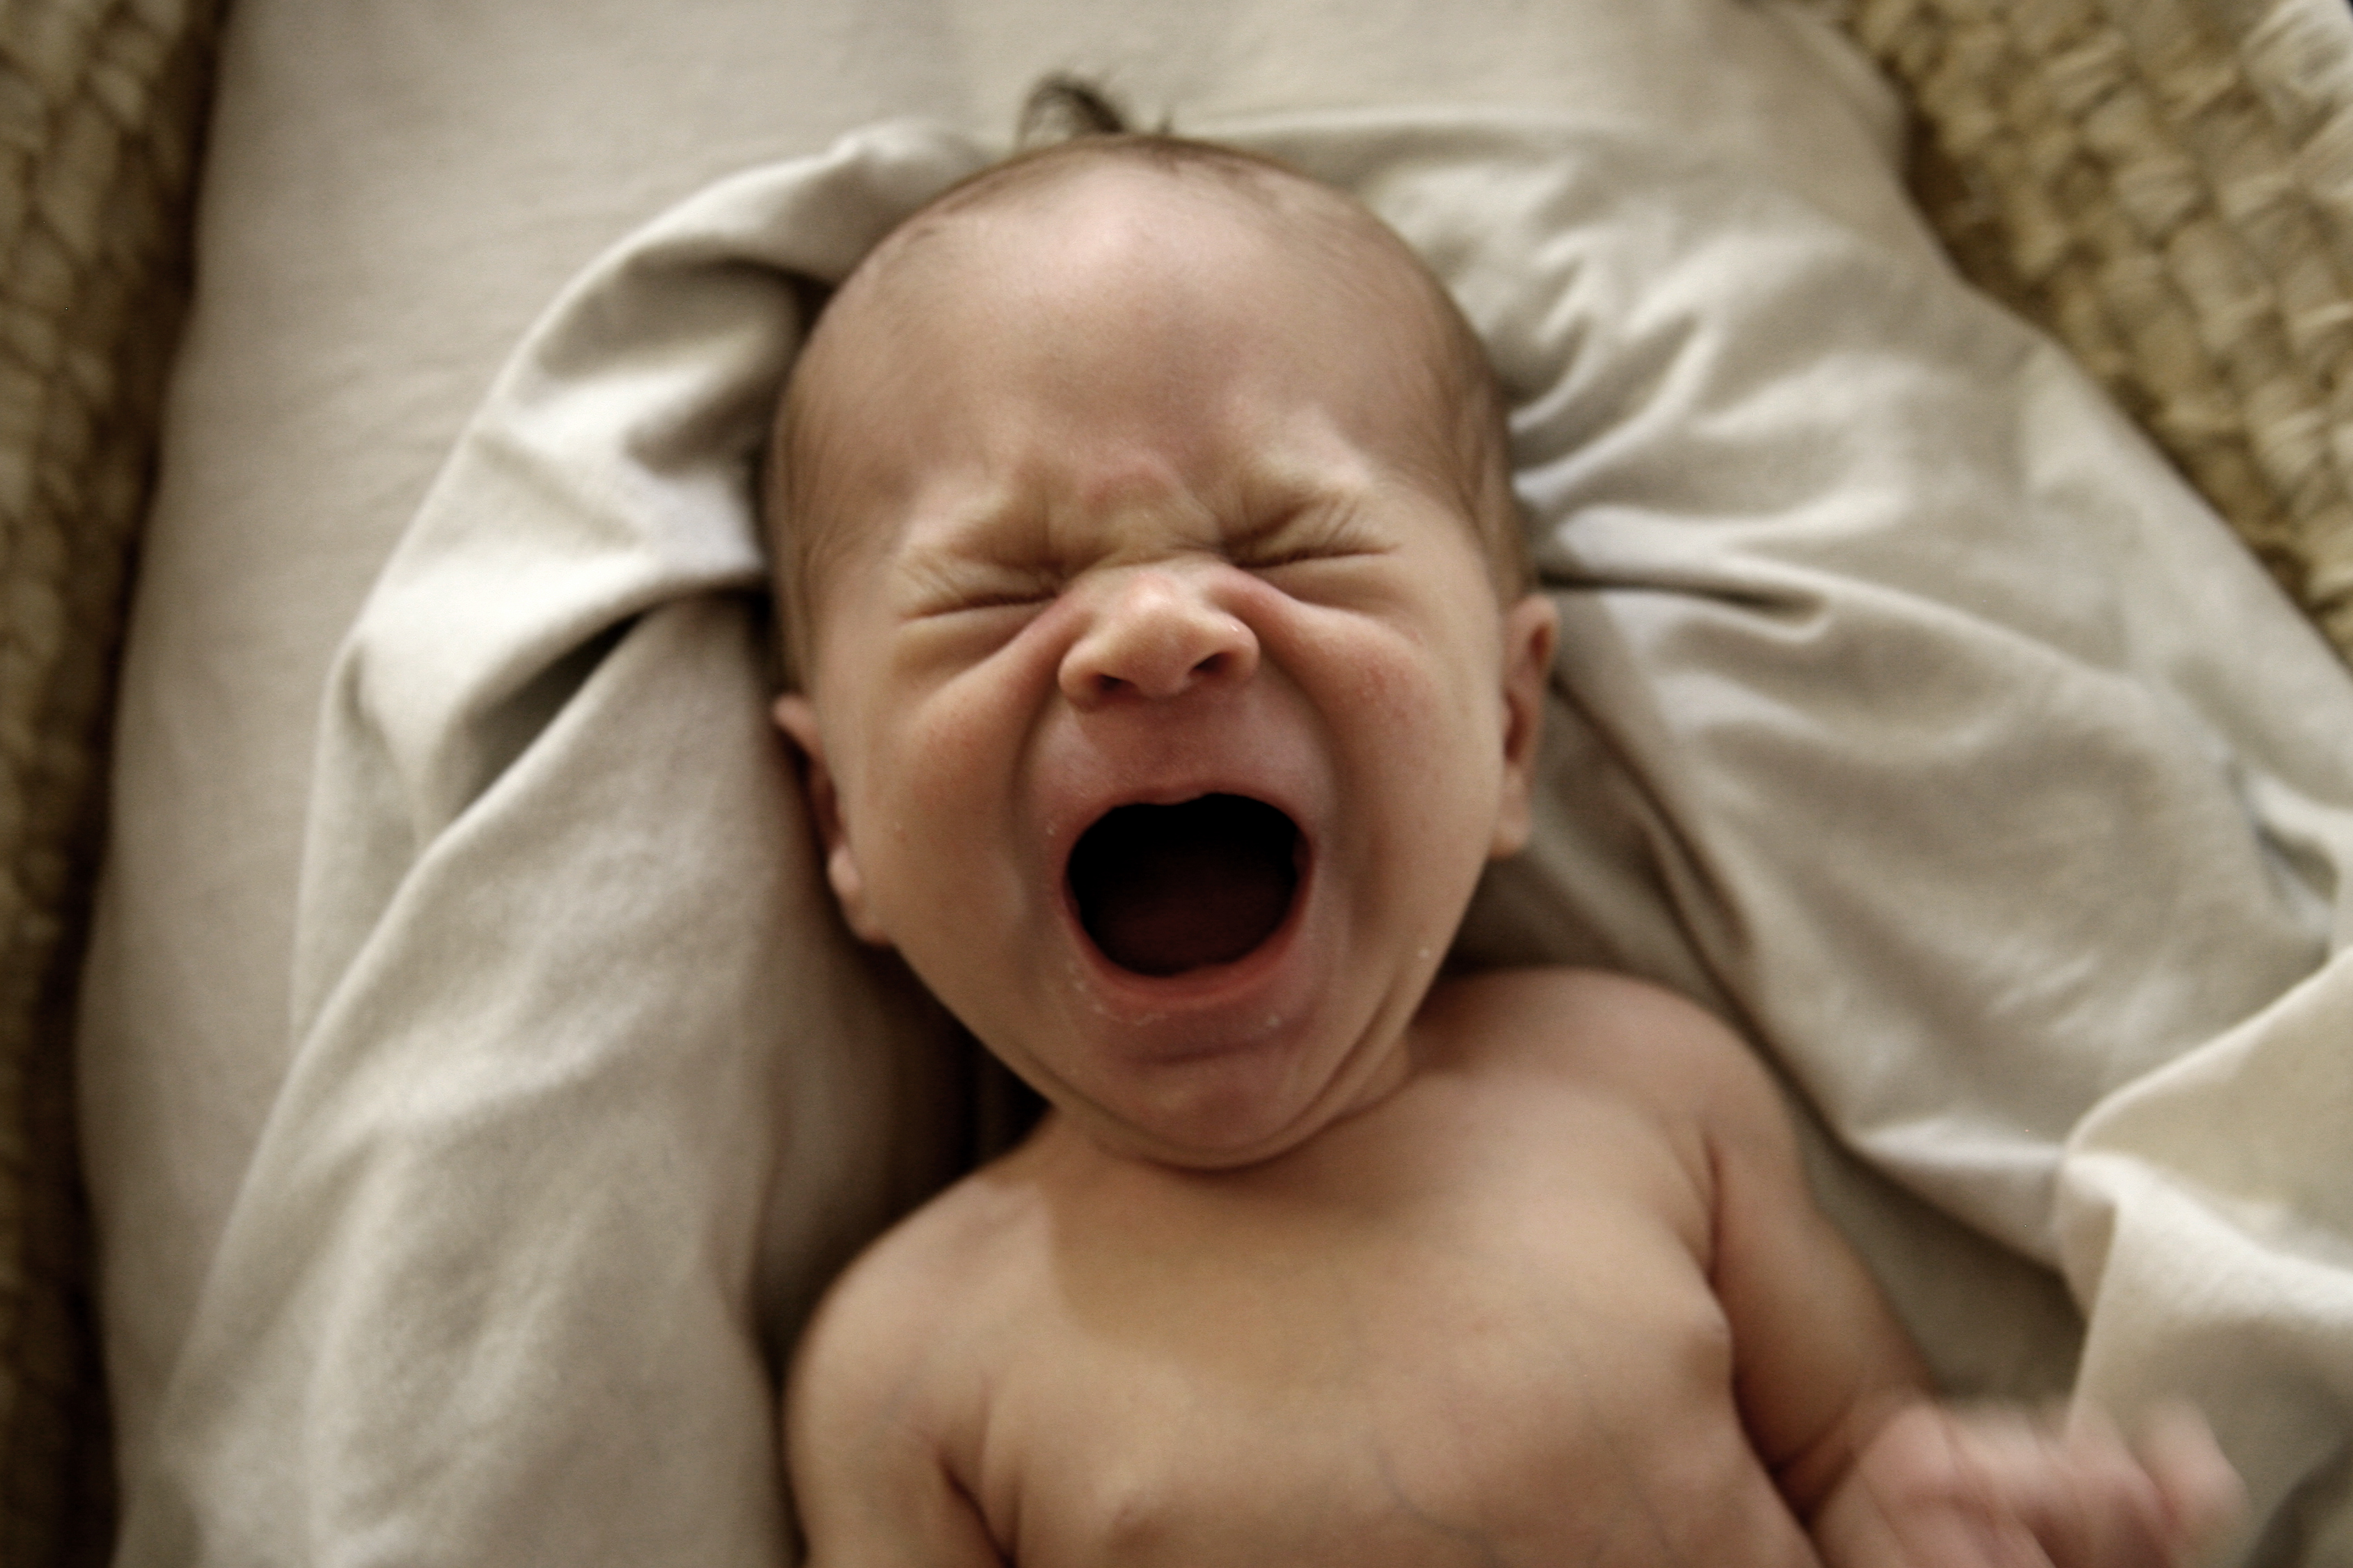 LISTEN: Could a crying baby get you kicked out of your home?